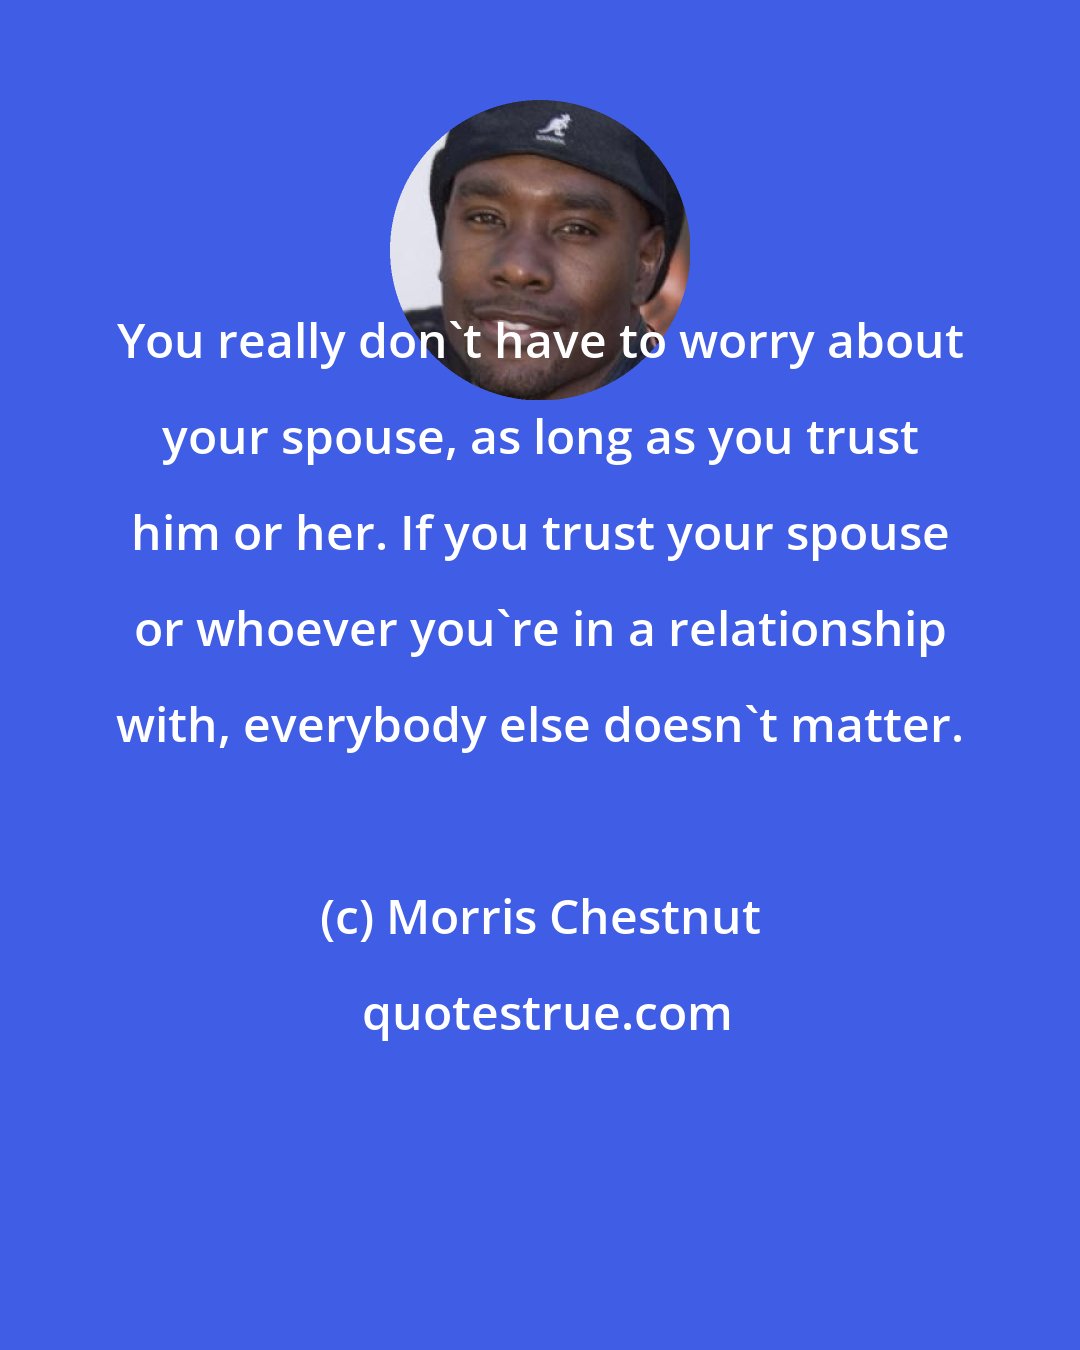 Morris Chestnut: You really don't have to worry about your spouse, as long as you trust him or her. If you trust your spouse or whoever you're in a relationship with, everybody else doesn't matter.